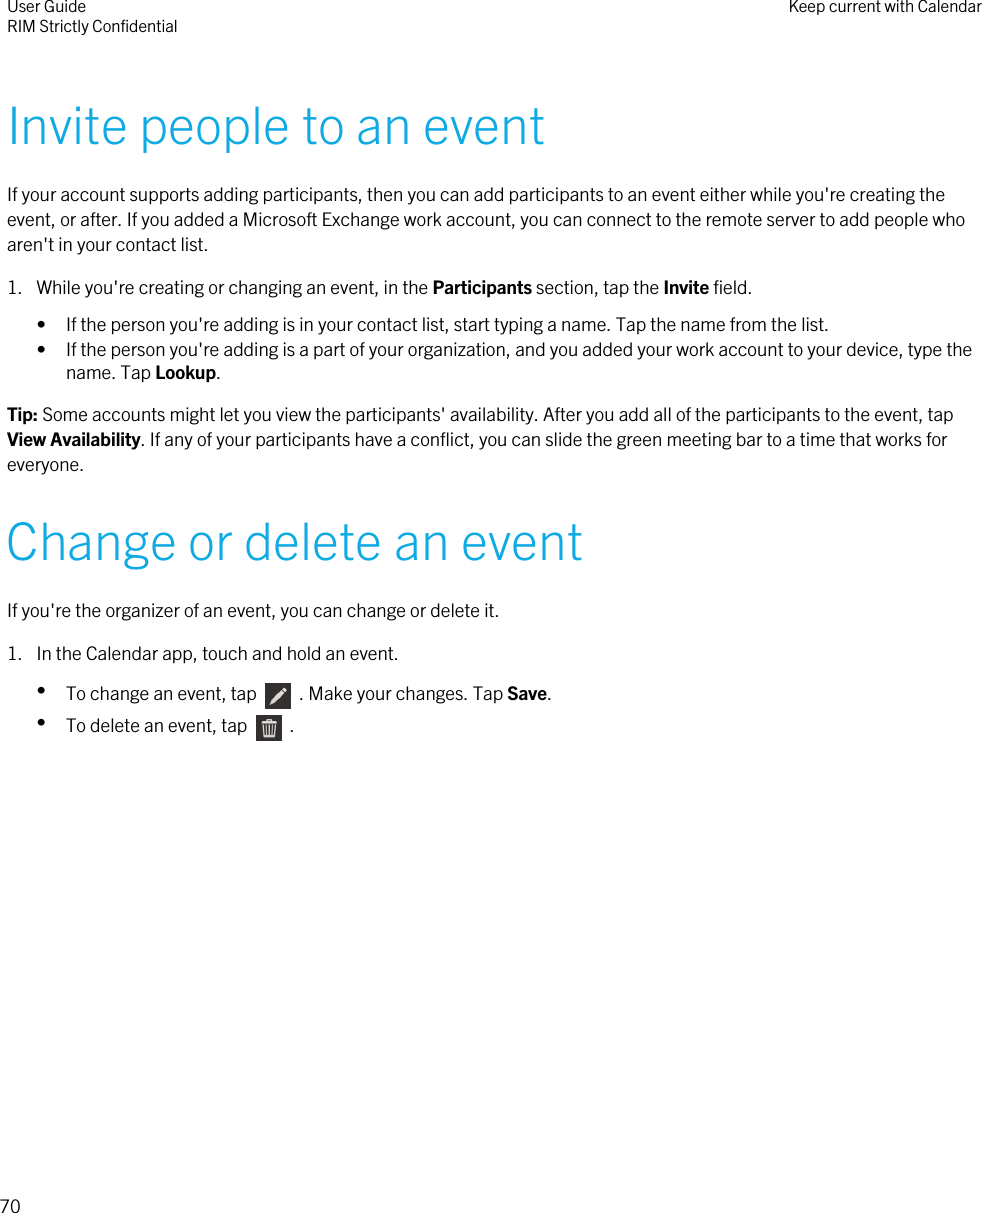 Invite people to an eventIf your account supports adding participants, then you can add participants to an event either while you&apos;re creating theevent, or after. If you added a Microsoft Exchange work account, you can connect to the remote server to add people whoaren&apos;t in your contact list.1. While you&apos;re creating or changing an event, in the Participants section, tap the Invite field.• If the person you&apos;re adding is in your contact list, start typing a name. Tap the name from the list.• If the person you&apos;re adding is a part of your organization, and you added your work account to your device, type thename. Tap Lookup.Tip: Some accounts might let you view the participants&apos; availability. After you add all of the participants to the event, tapView Availability. If any of your participants have a conflict, you can slide the green meeting bar to a time that works foreveryone.Change or delete an eventIf you&apos;re the organizer of an event, you can change or delete it.1. In the Calendar app, touch and hold an event.•To change an event, tap    . Make your changes. Tap Save.•To delete an event, tap    .User GuideRIM Strictly Confidential Keep current with Calendar70